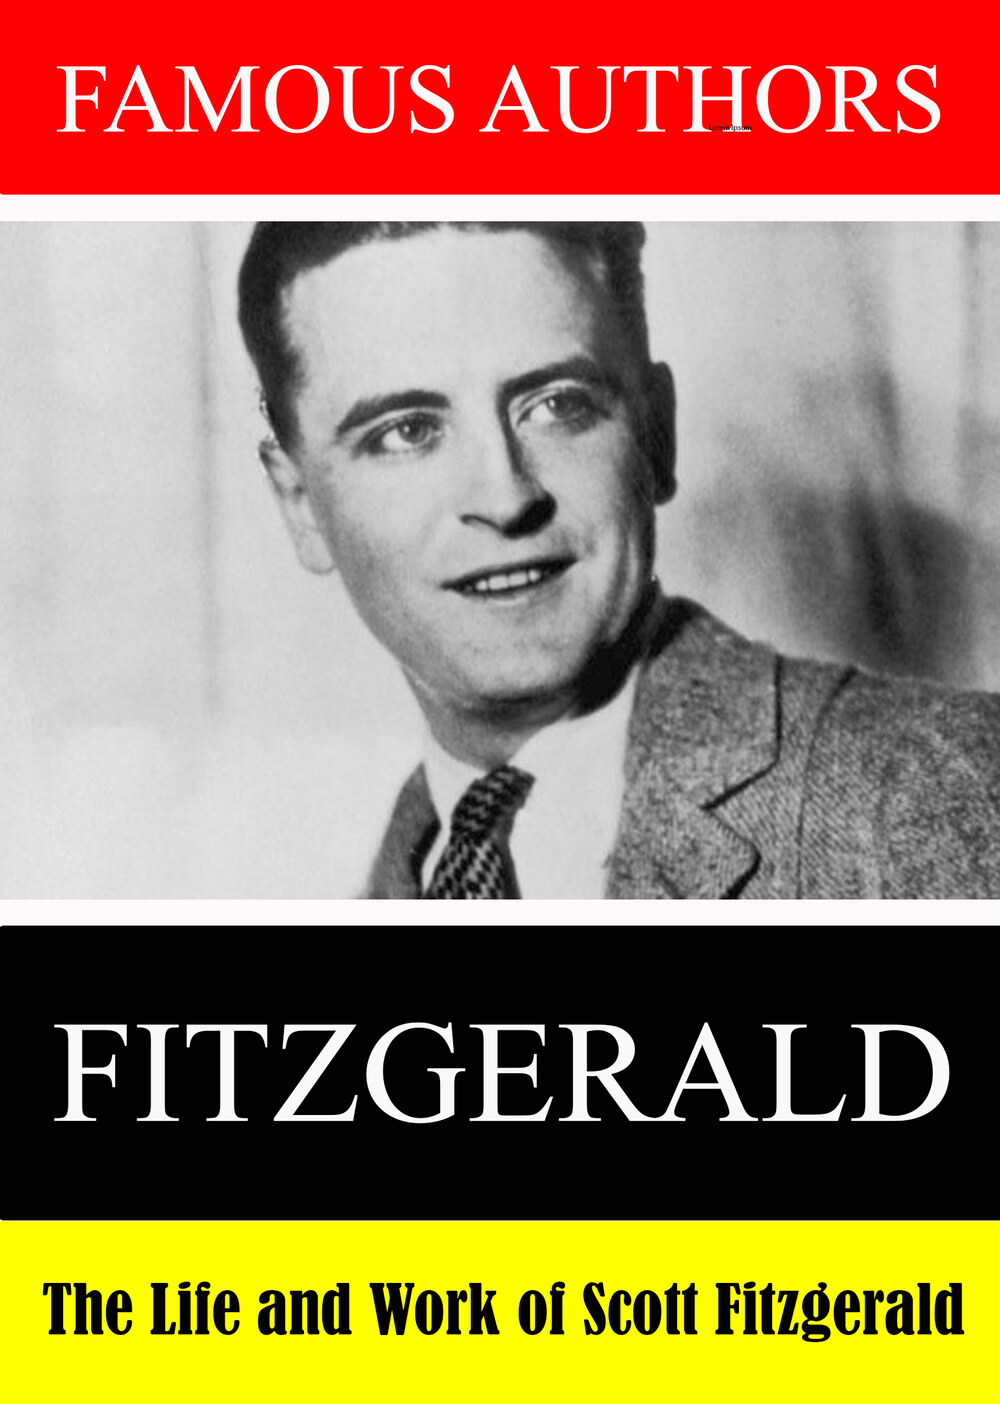 L7883 - Famous Authors: The Life and Work of F. Scott Fitzgerald